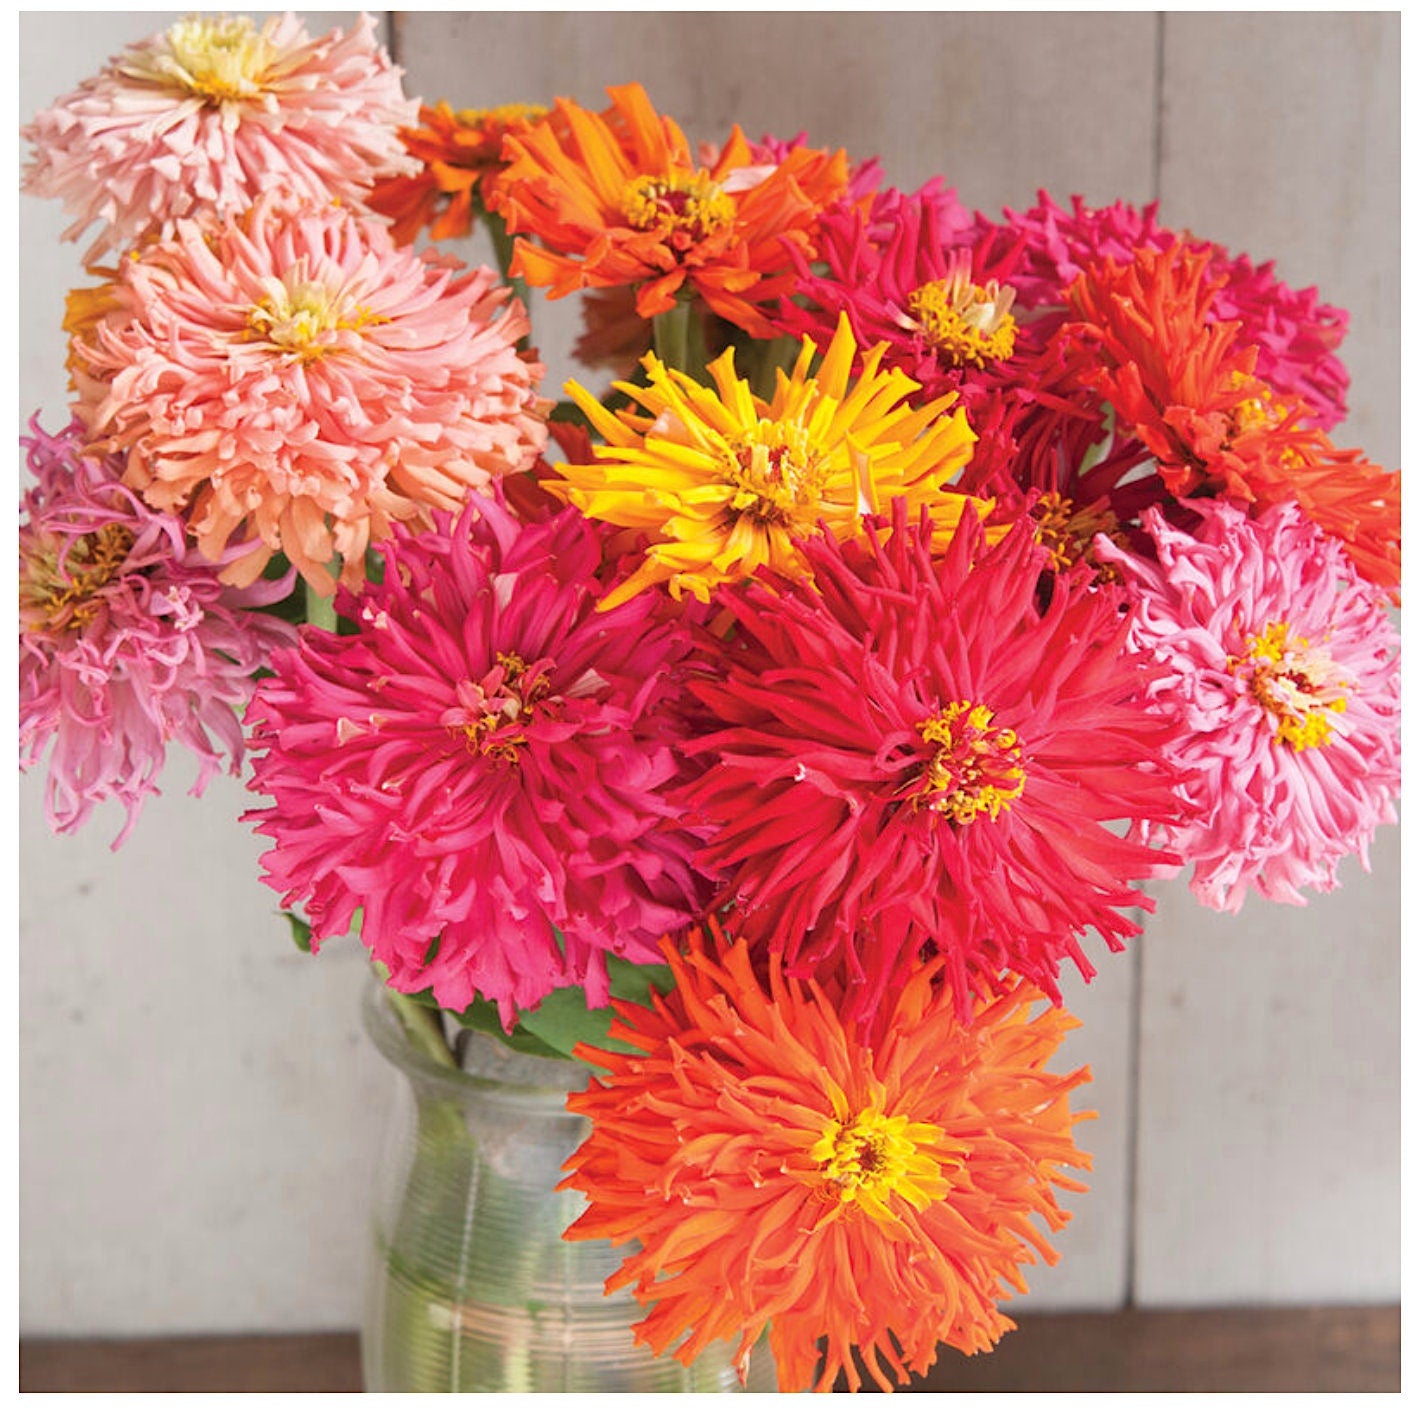 Cactus Flowered Zinnia flower seeds - Mix of colors and adds variety to any bouquet